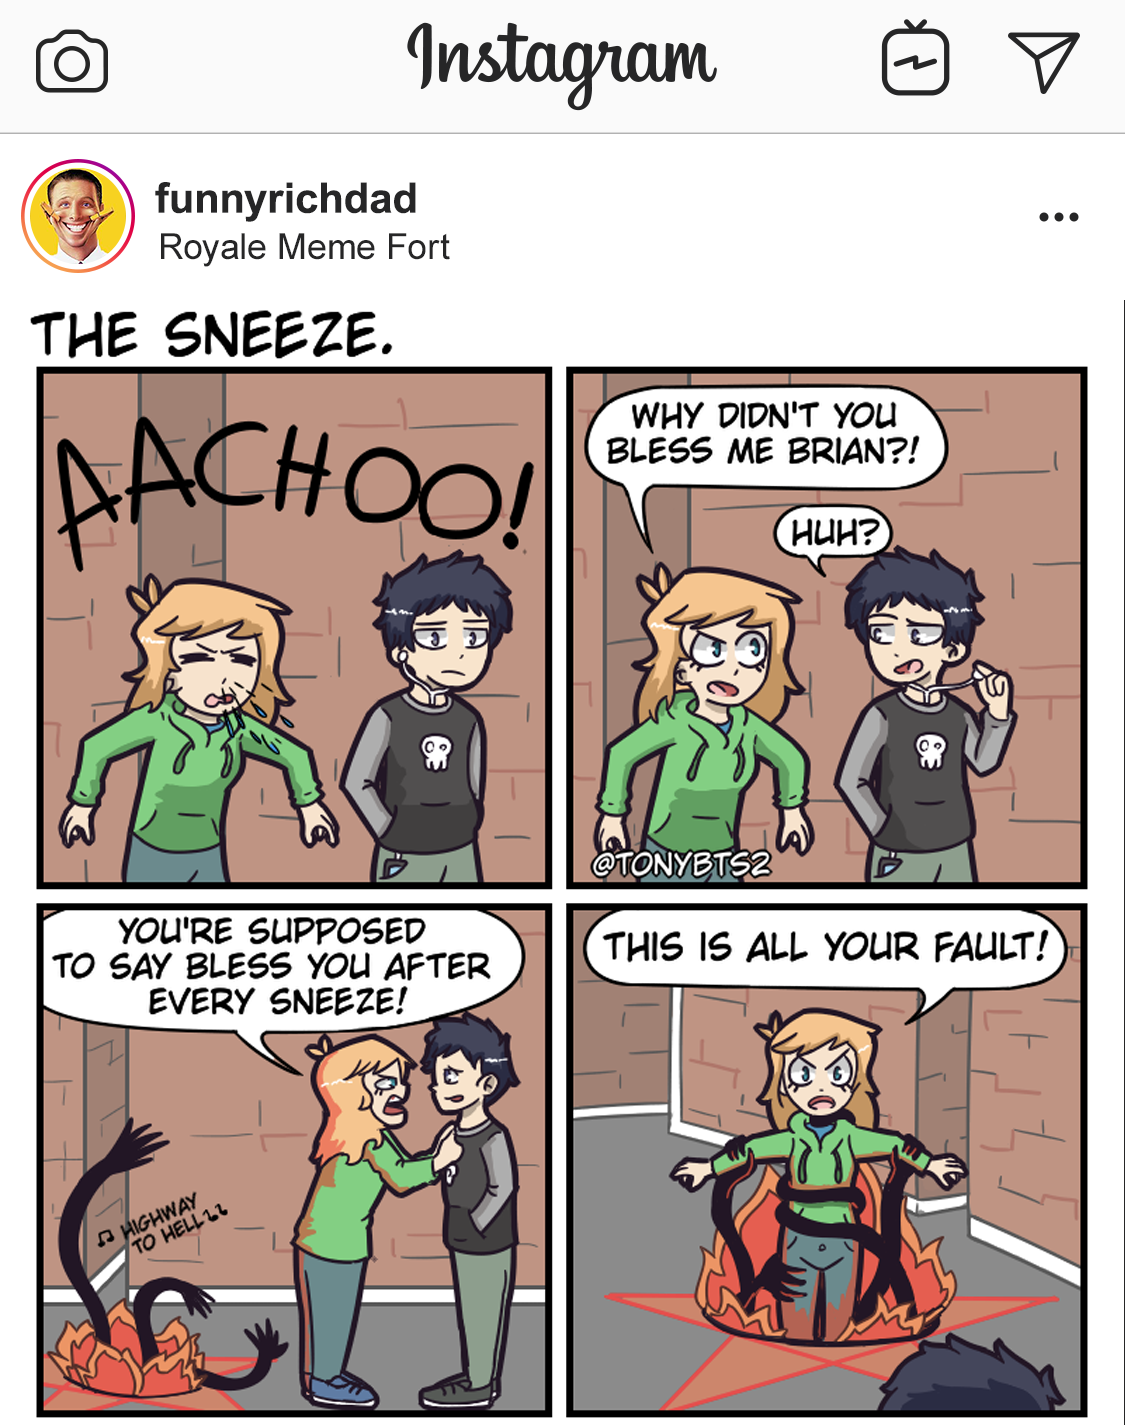 comics - Instagram funnyrichdad Royale Meme Fort The Sneeze Why Didn'T You Bless Me Brian?! Aachool ? Wc Ponybe You'Re Supposed To Say Bless You After Every Sneeze! This Is All Your Fault!